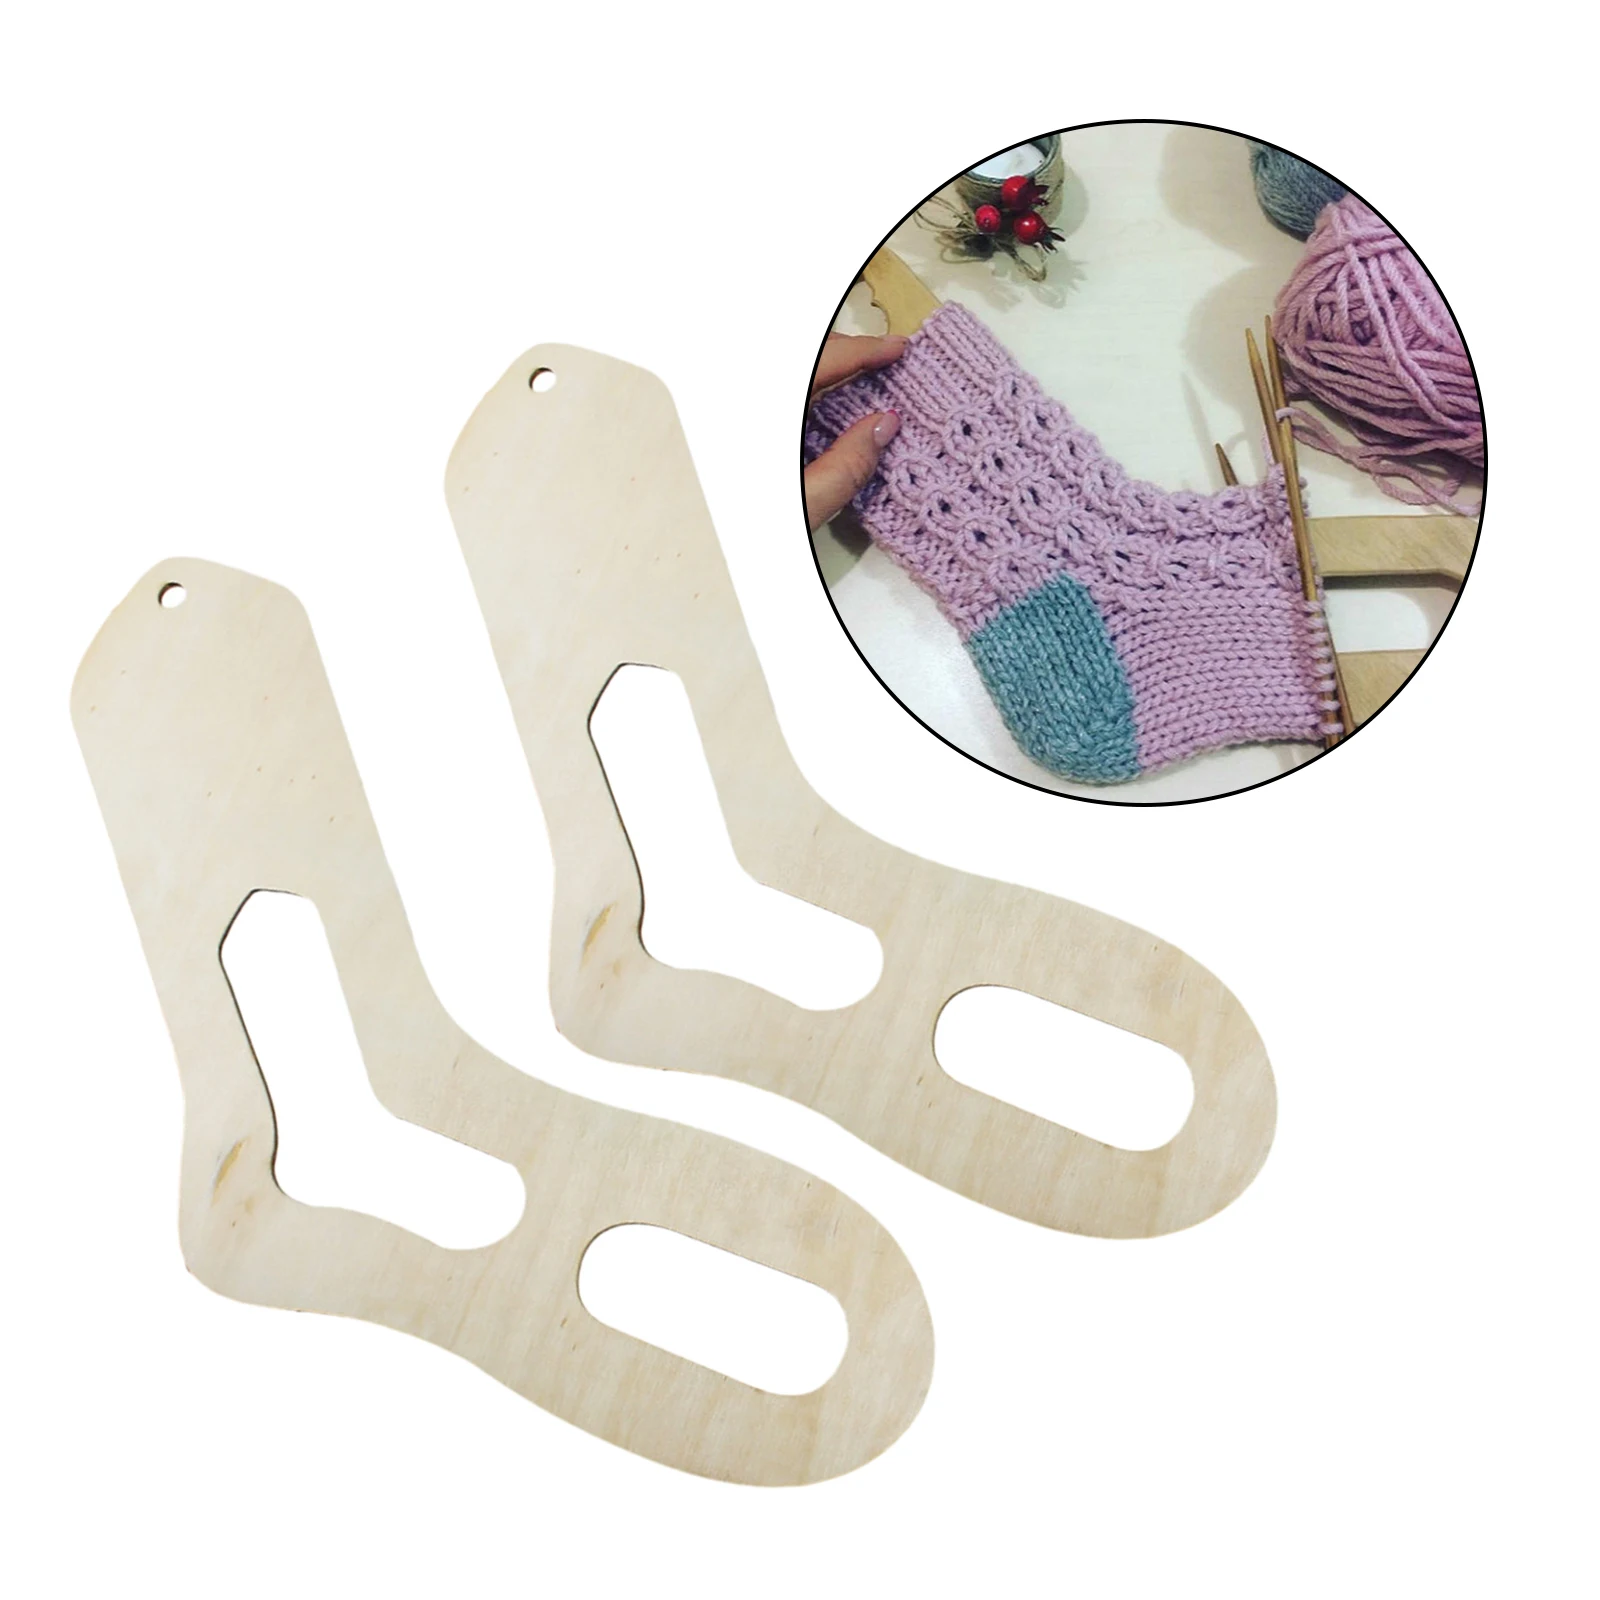 2Pieces Wooden Sock Blocker Stretchers Stocking Display Knitting Mold Adult